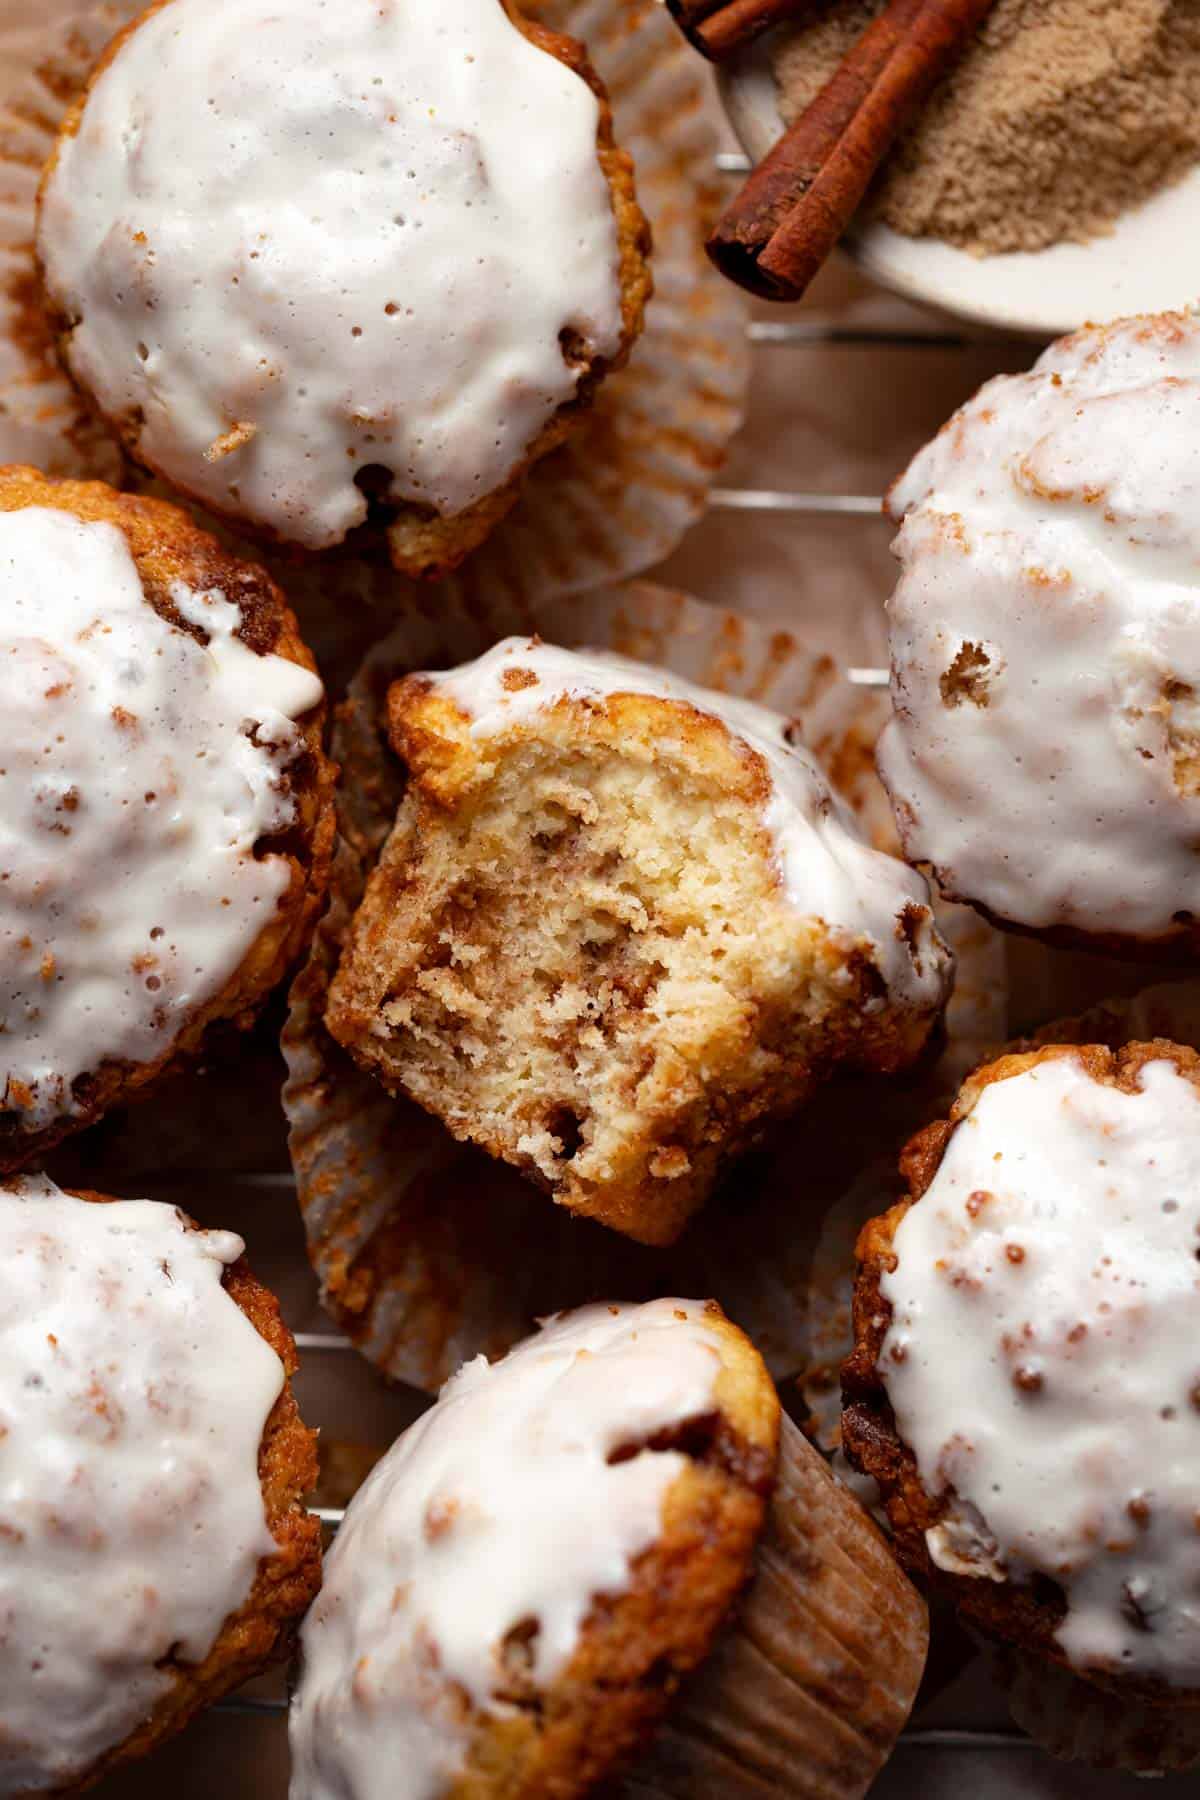 A cinnamon roll muffin with a bite taken out of it to show the cinnamon sugar swirls inside.